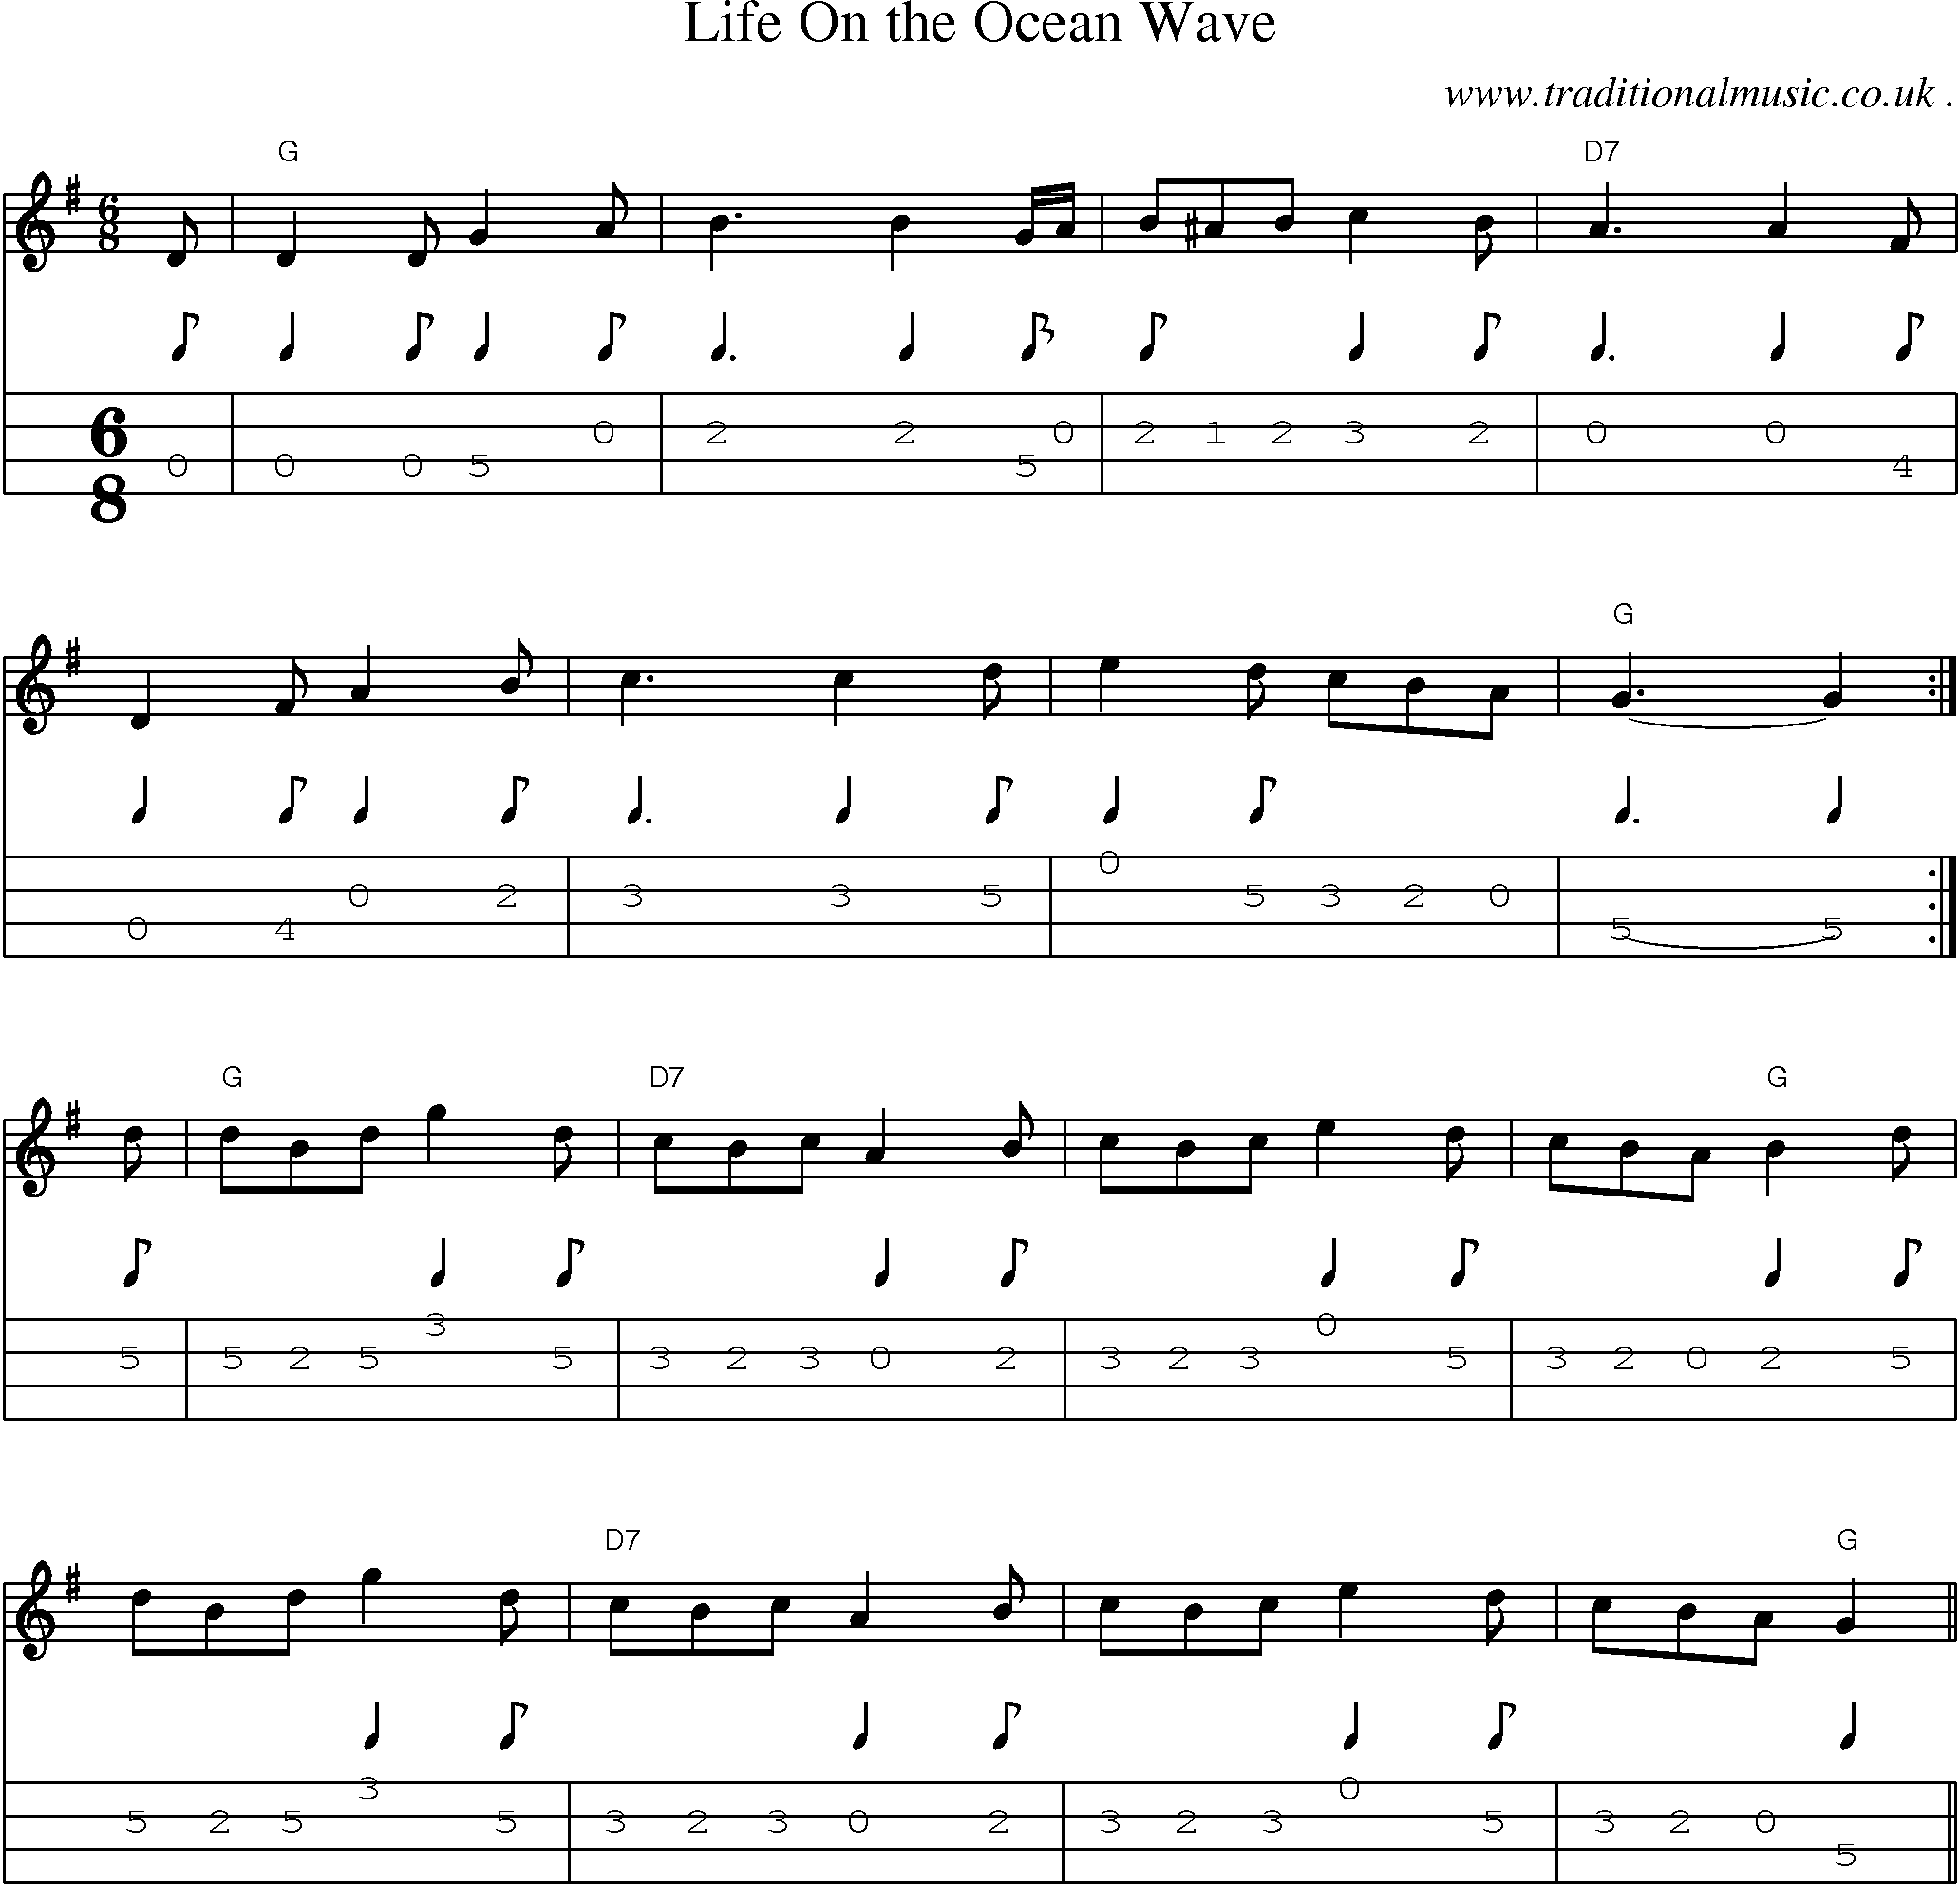 Music Score and Mandolin Tabs for Life On The Ocean Wave